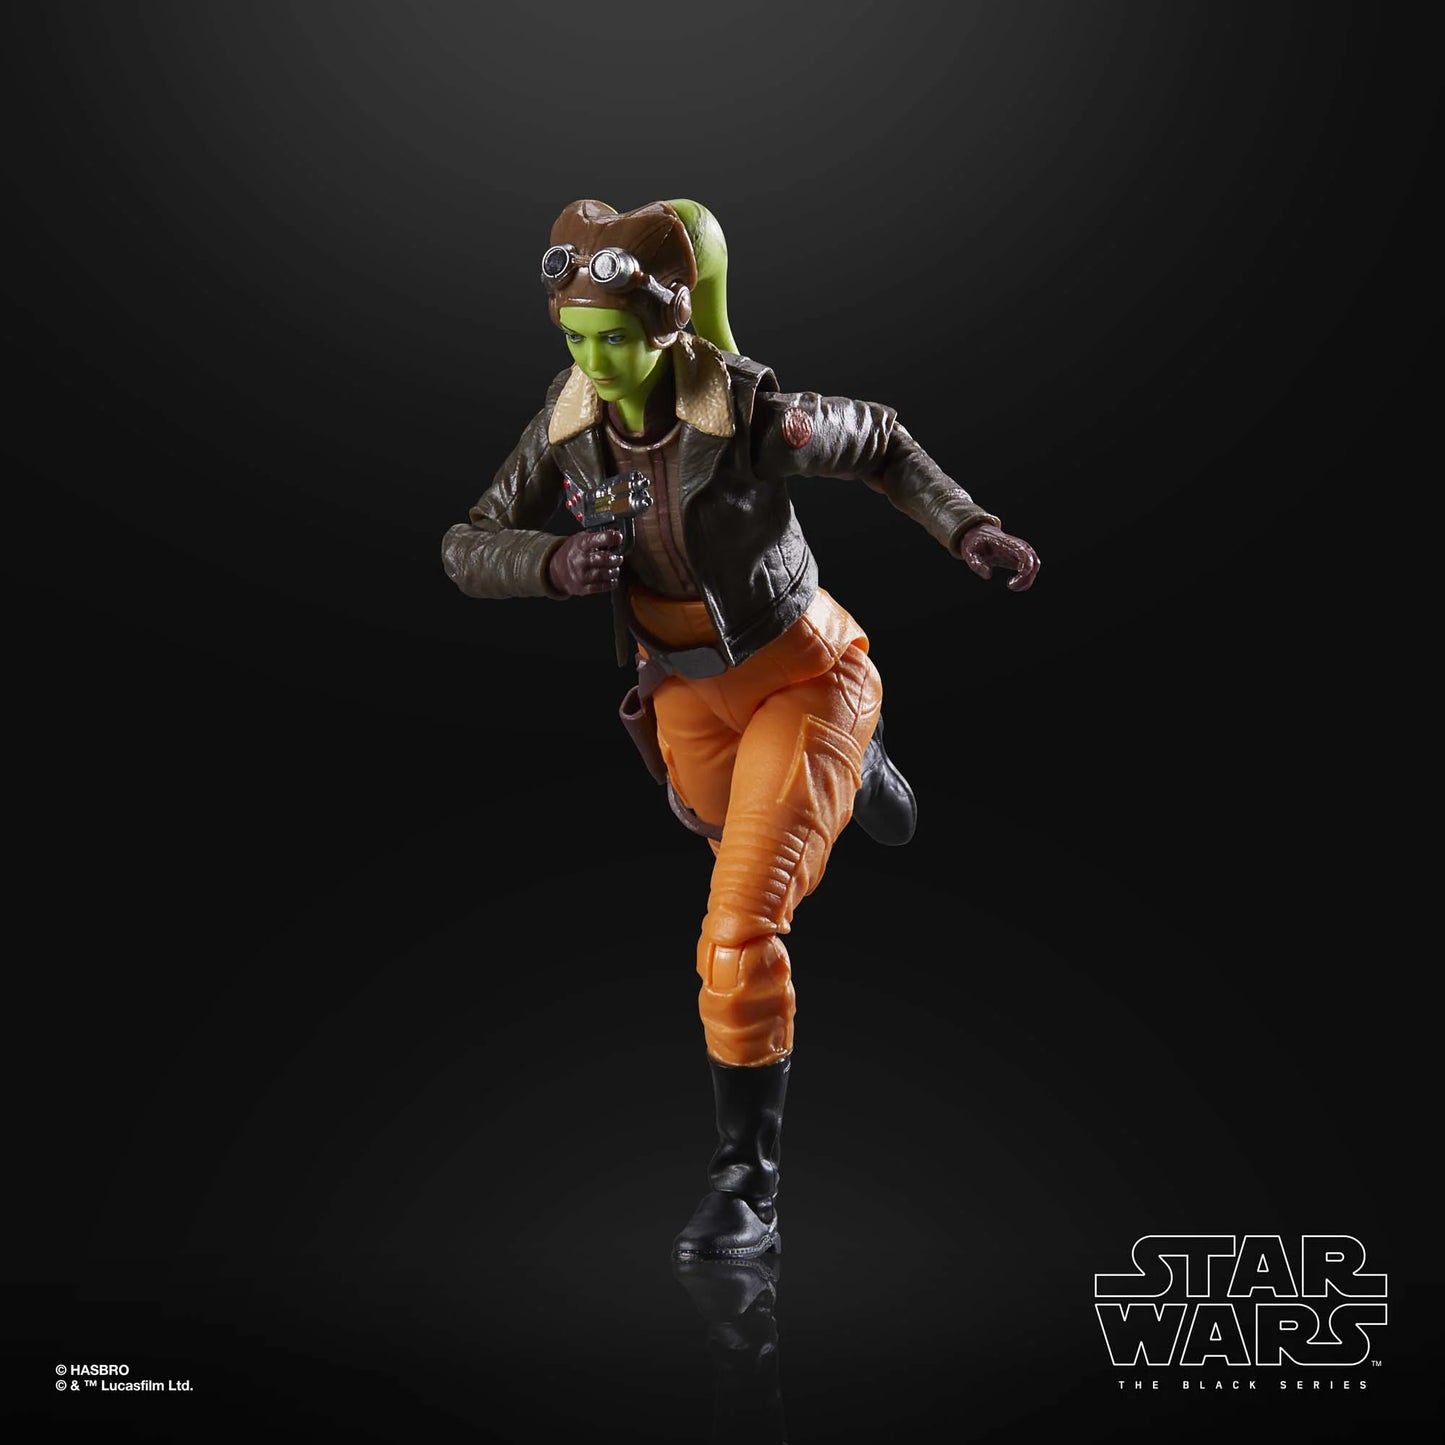 Star Wars The Black Series General Hera Syndulla 6-Inch Action Figure